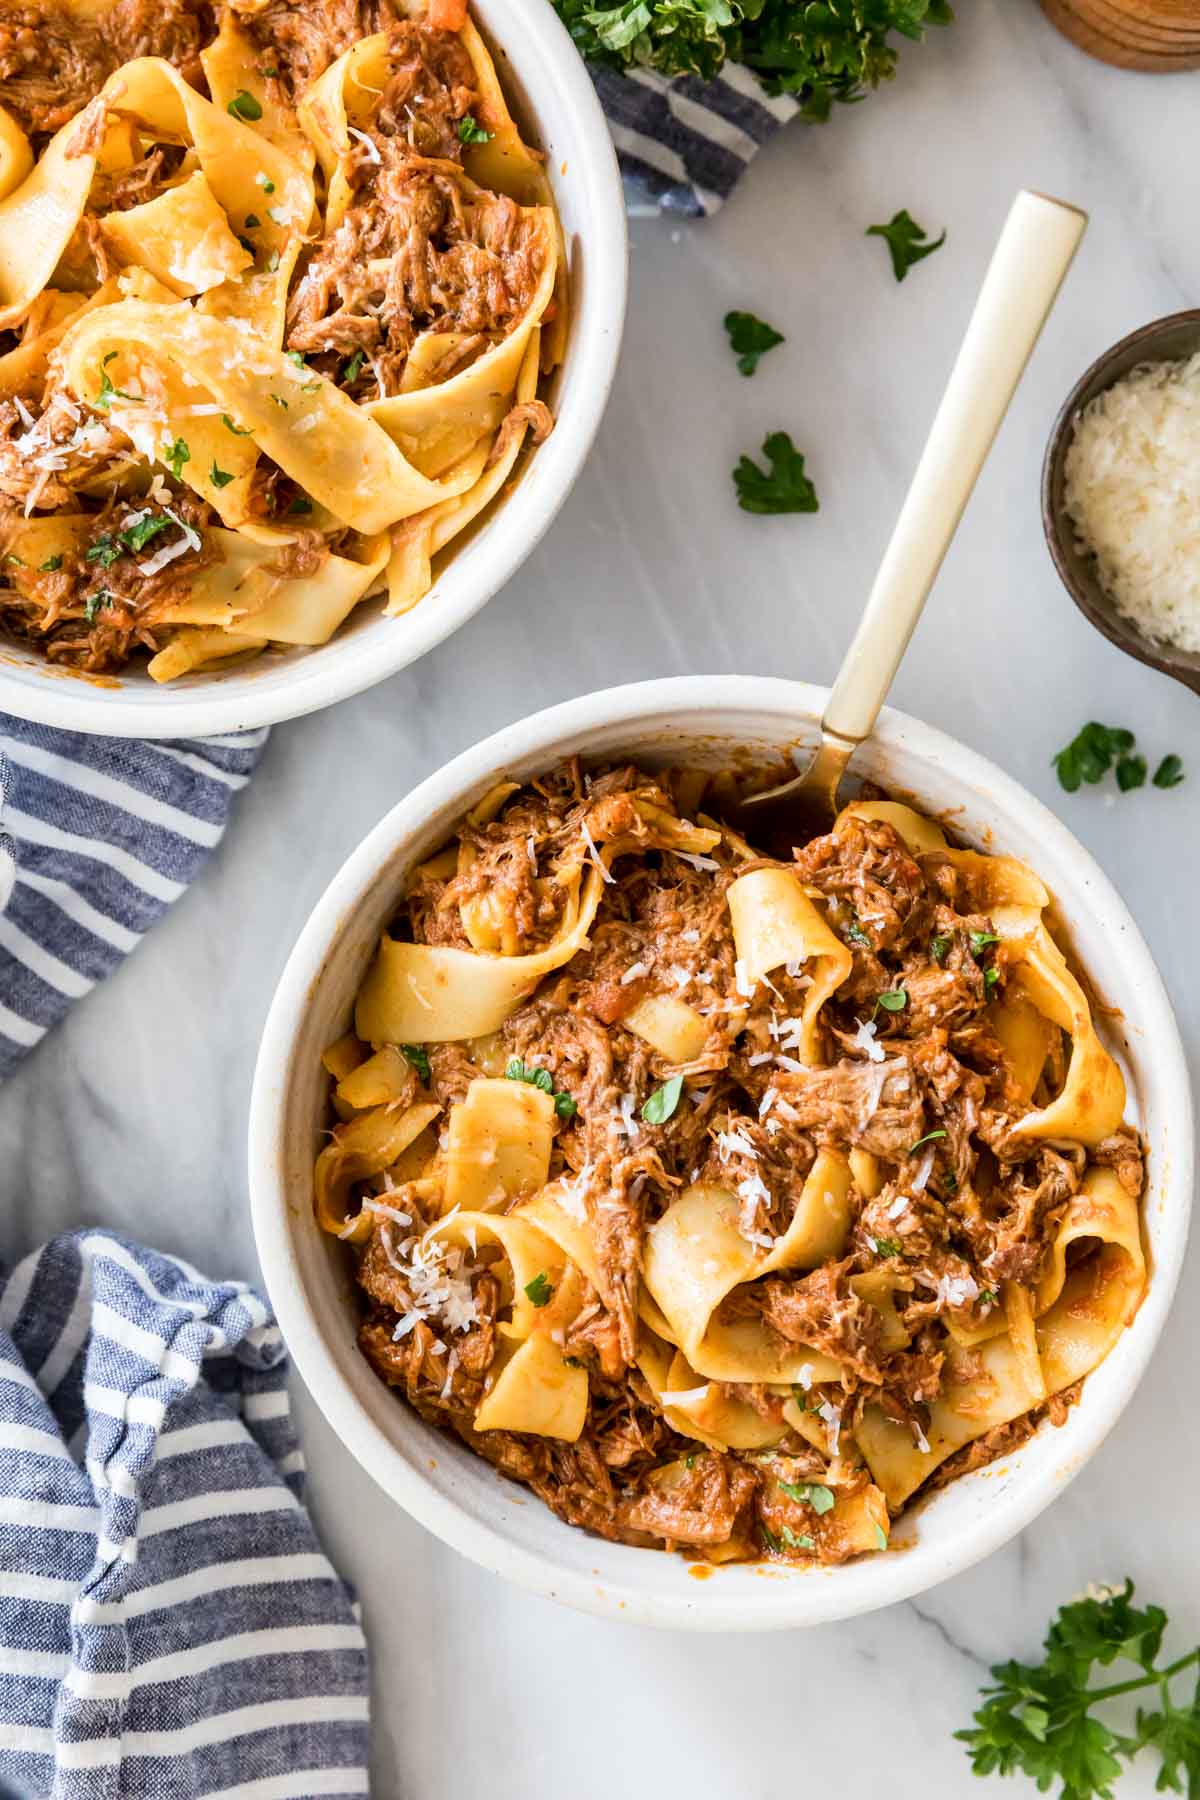 Overhead view of bowls of beef ragu served with wide pasta noodles.